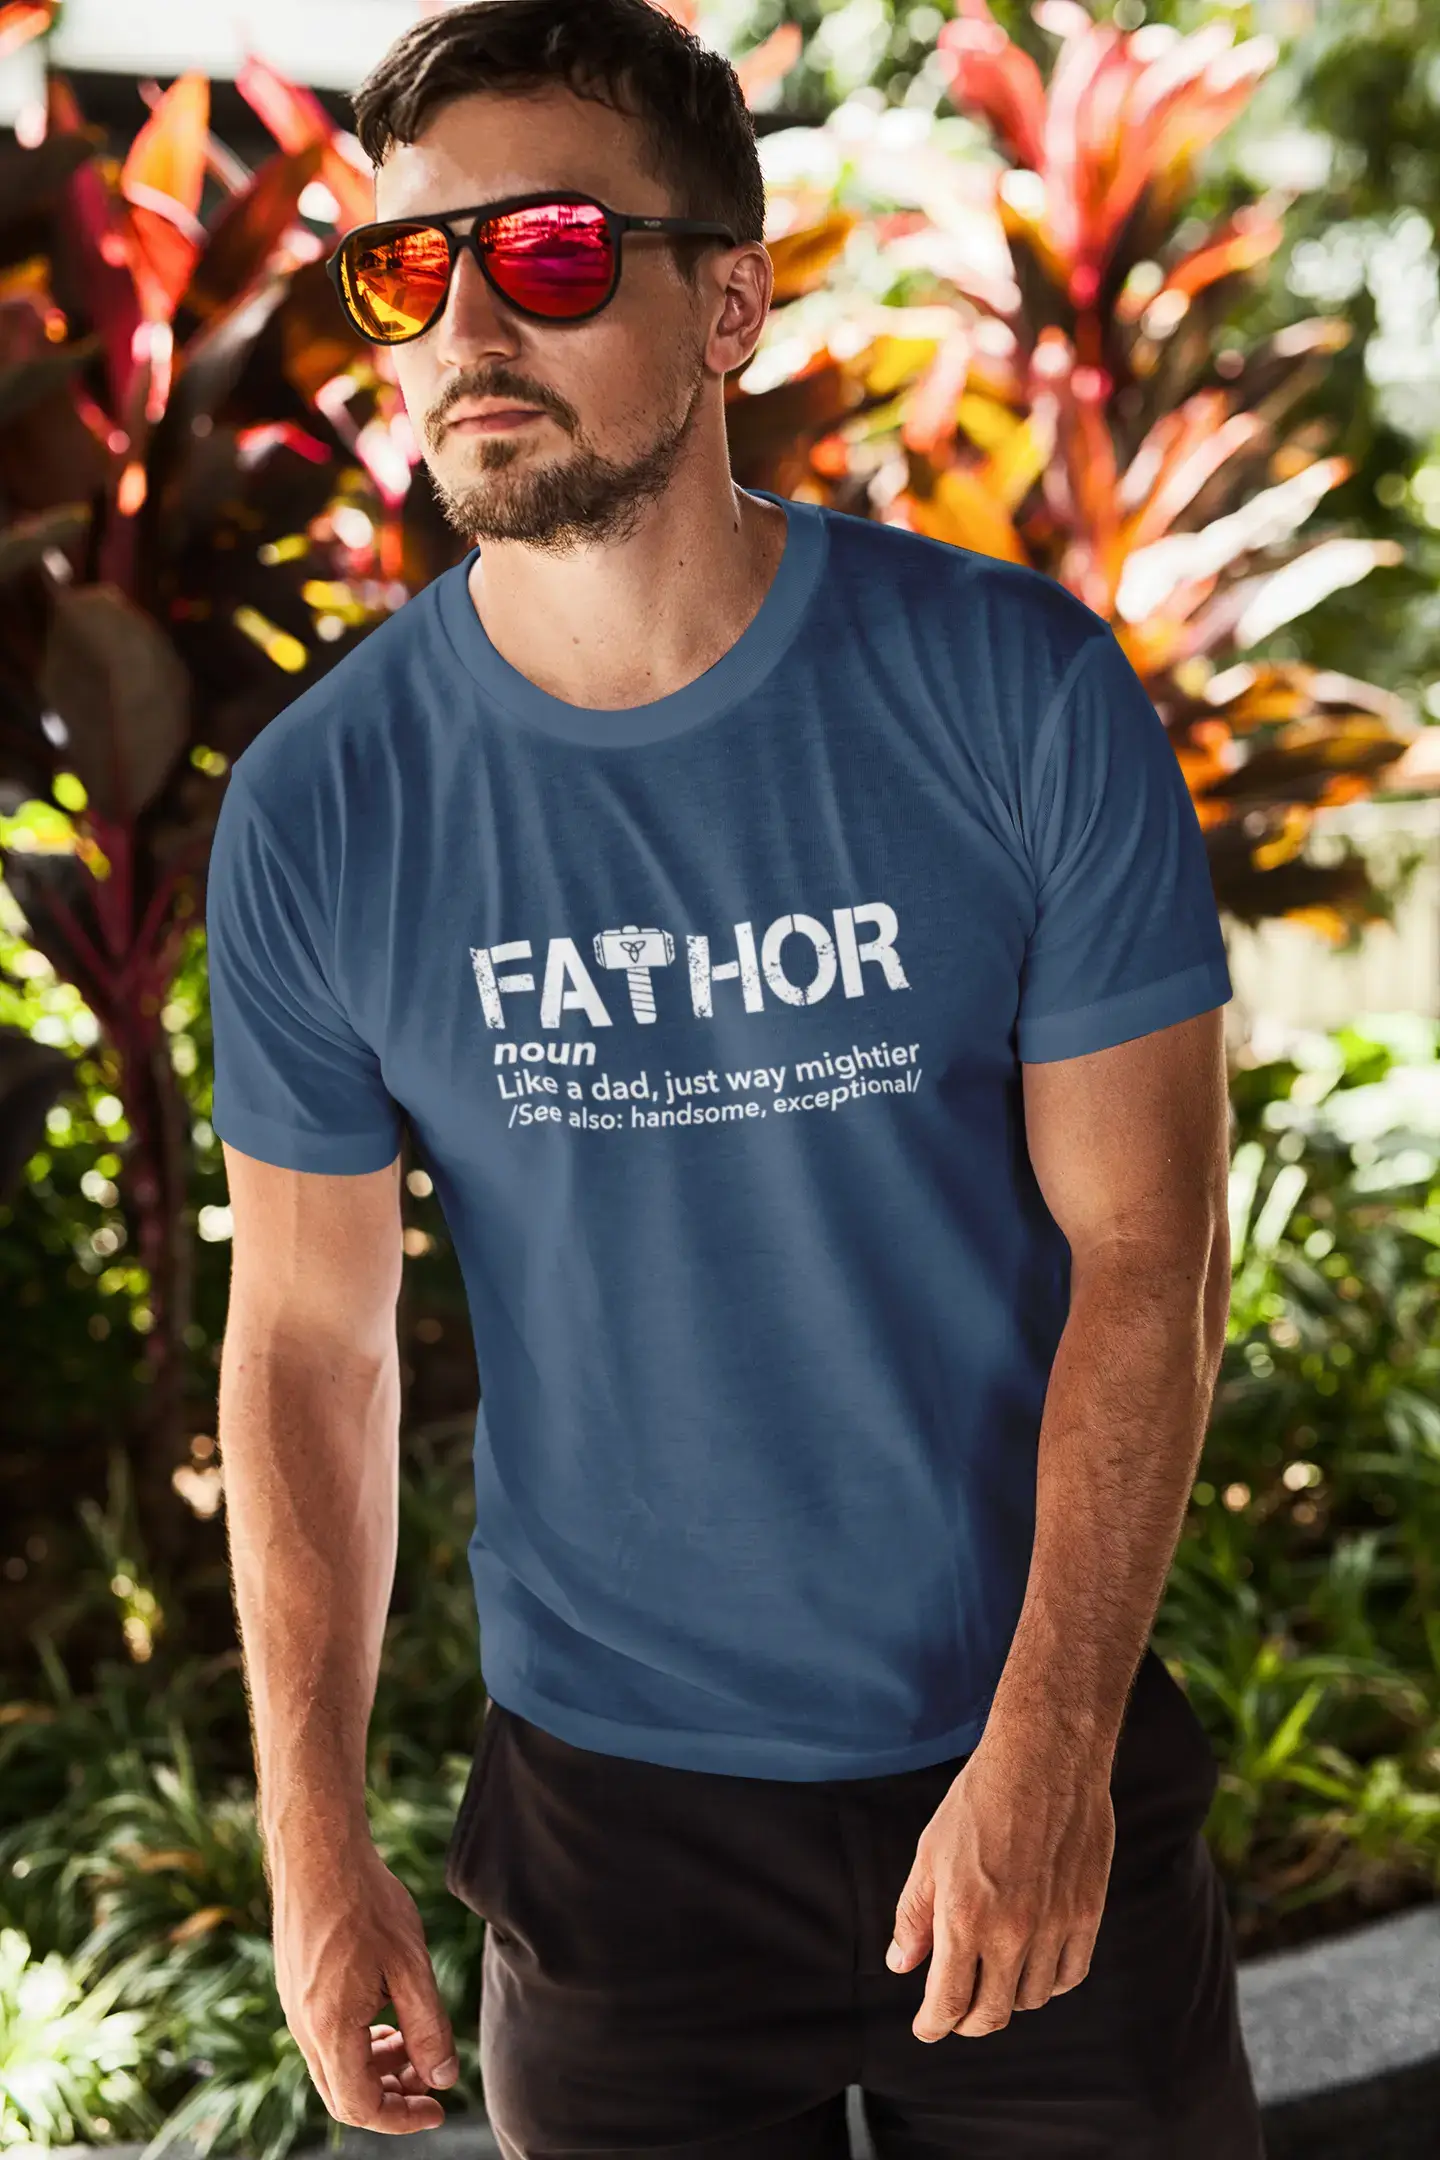 ULTRABASIC - Graphic Men's Fa-Thor Like Dad Just Way Mightier Shirt Printed Letters Navy